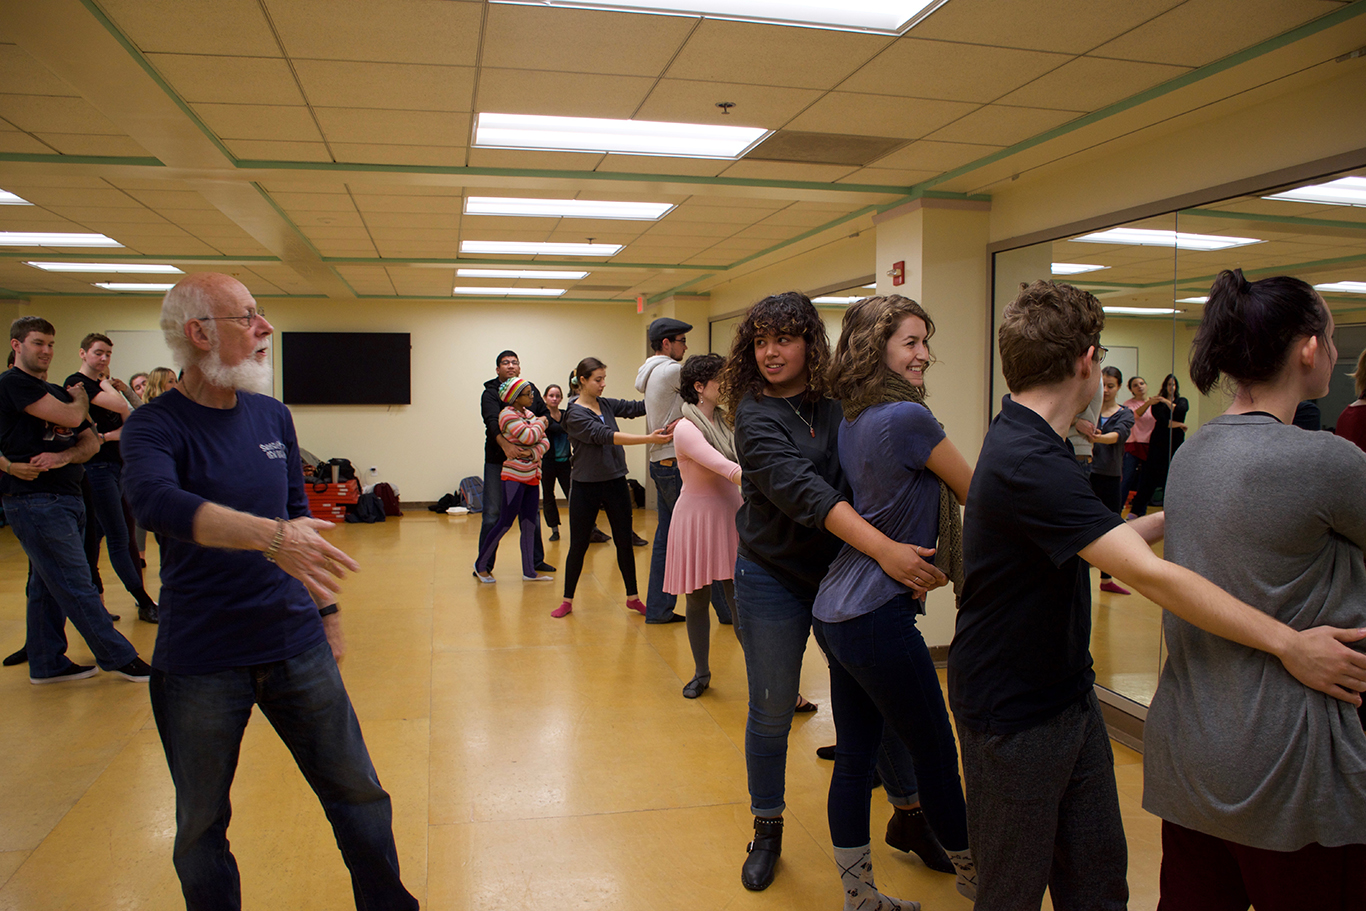 Professor shows students correct body placement during swing dance class in a dance studio.